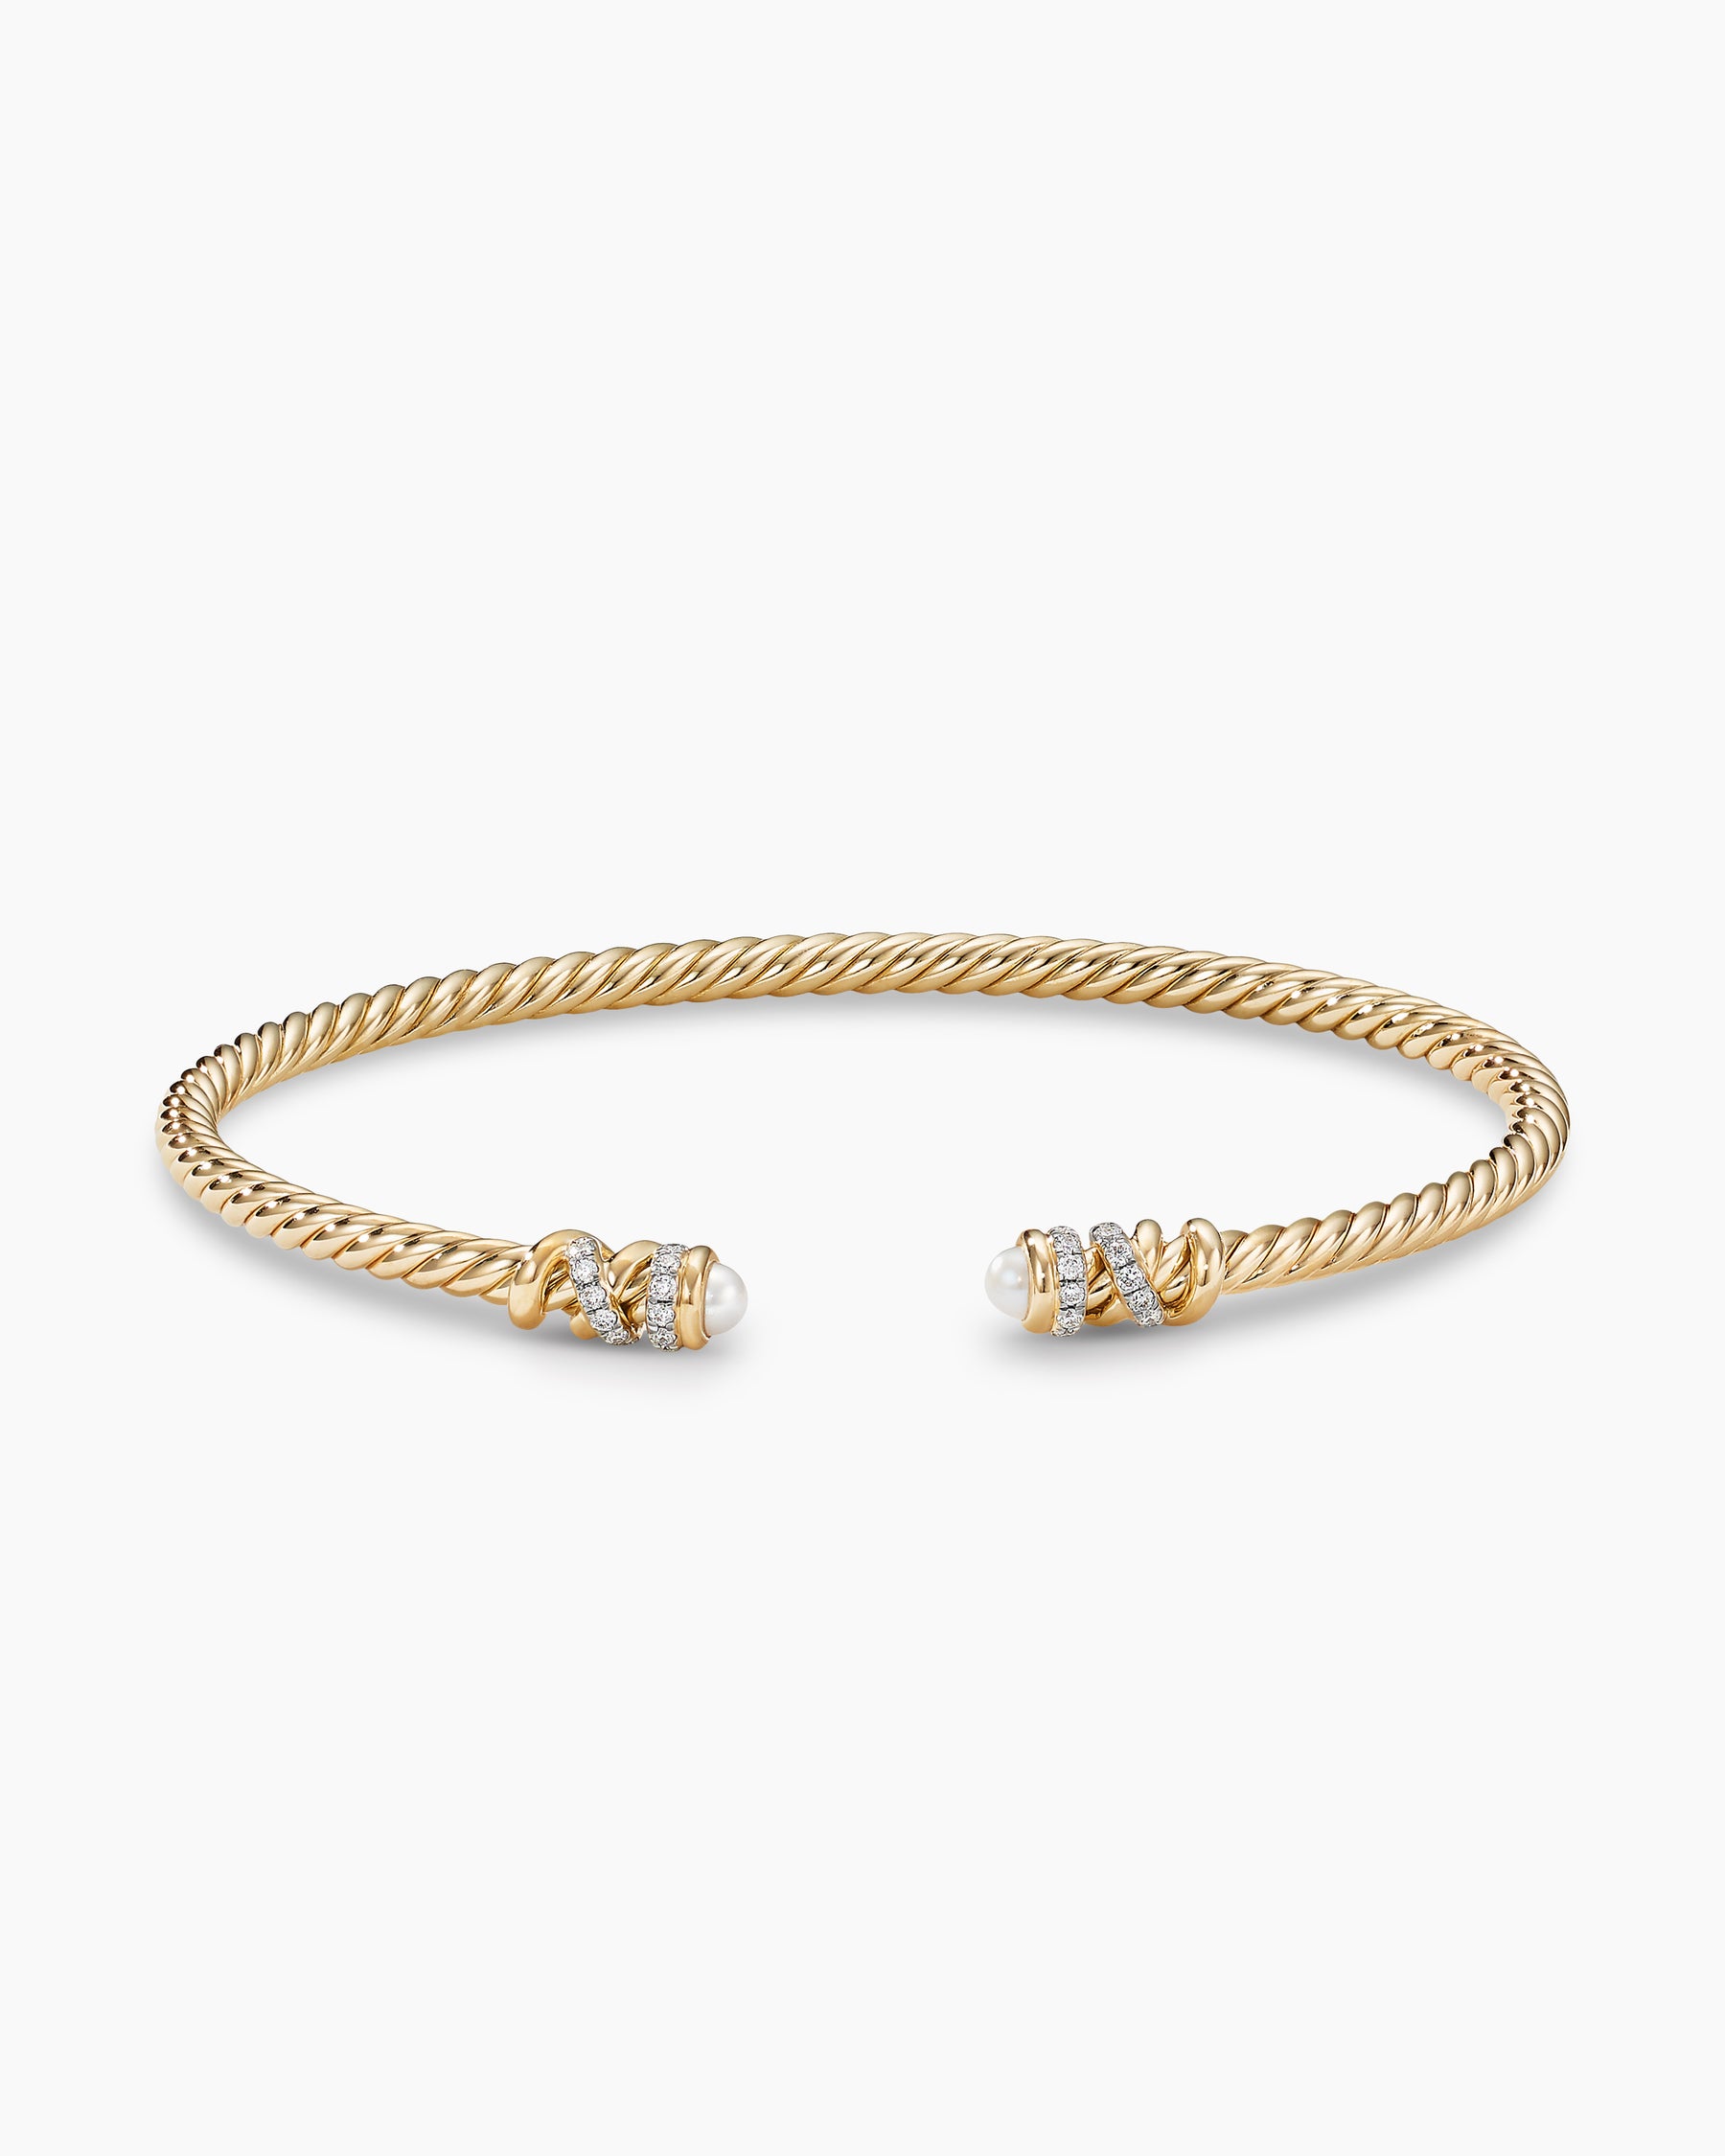 Petite Helena Cablespira Bracelet in 18K Yellow Gold with Diamonds, 3mm ...